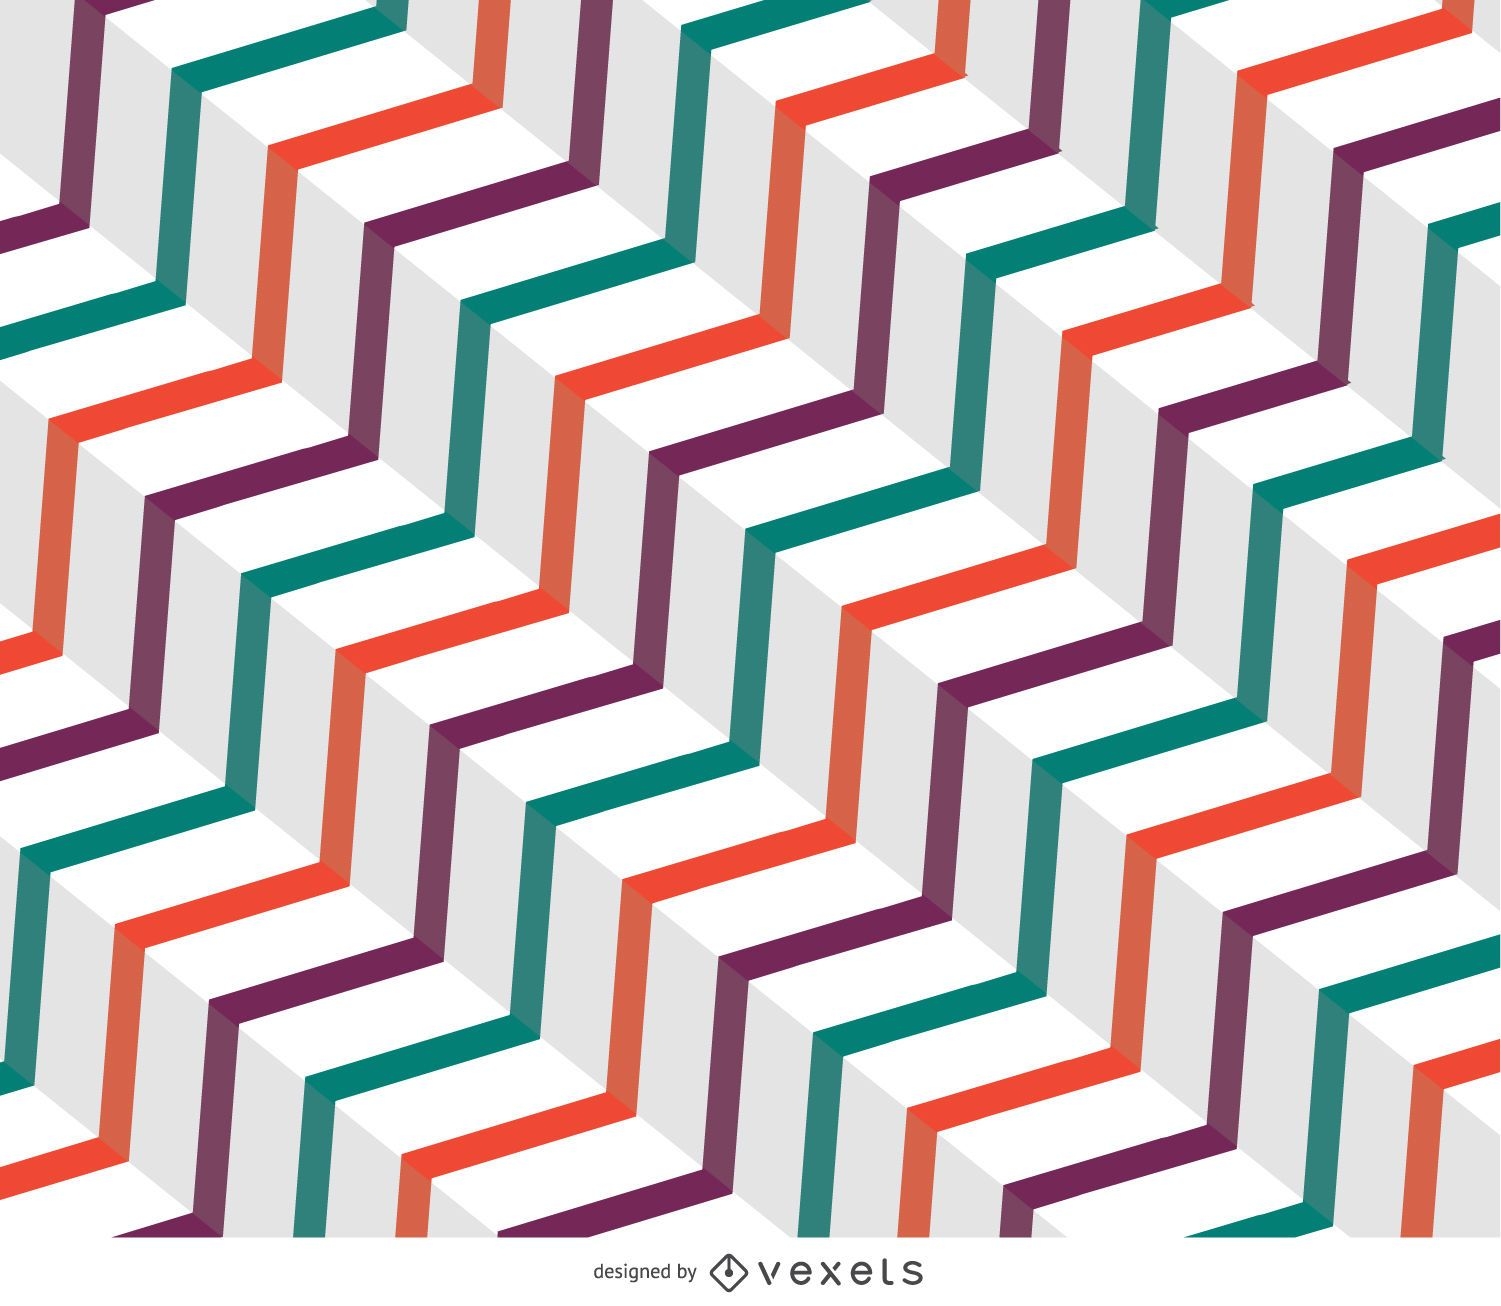 Samless vector pattern with lines